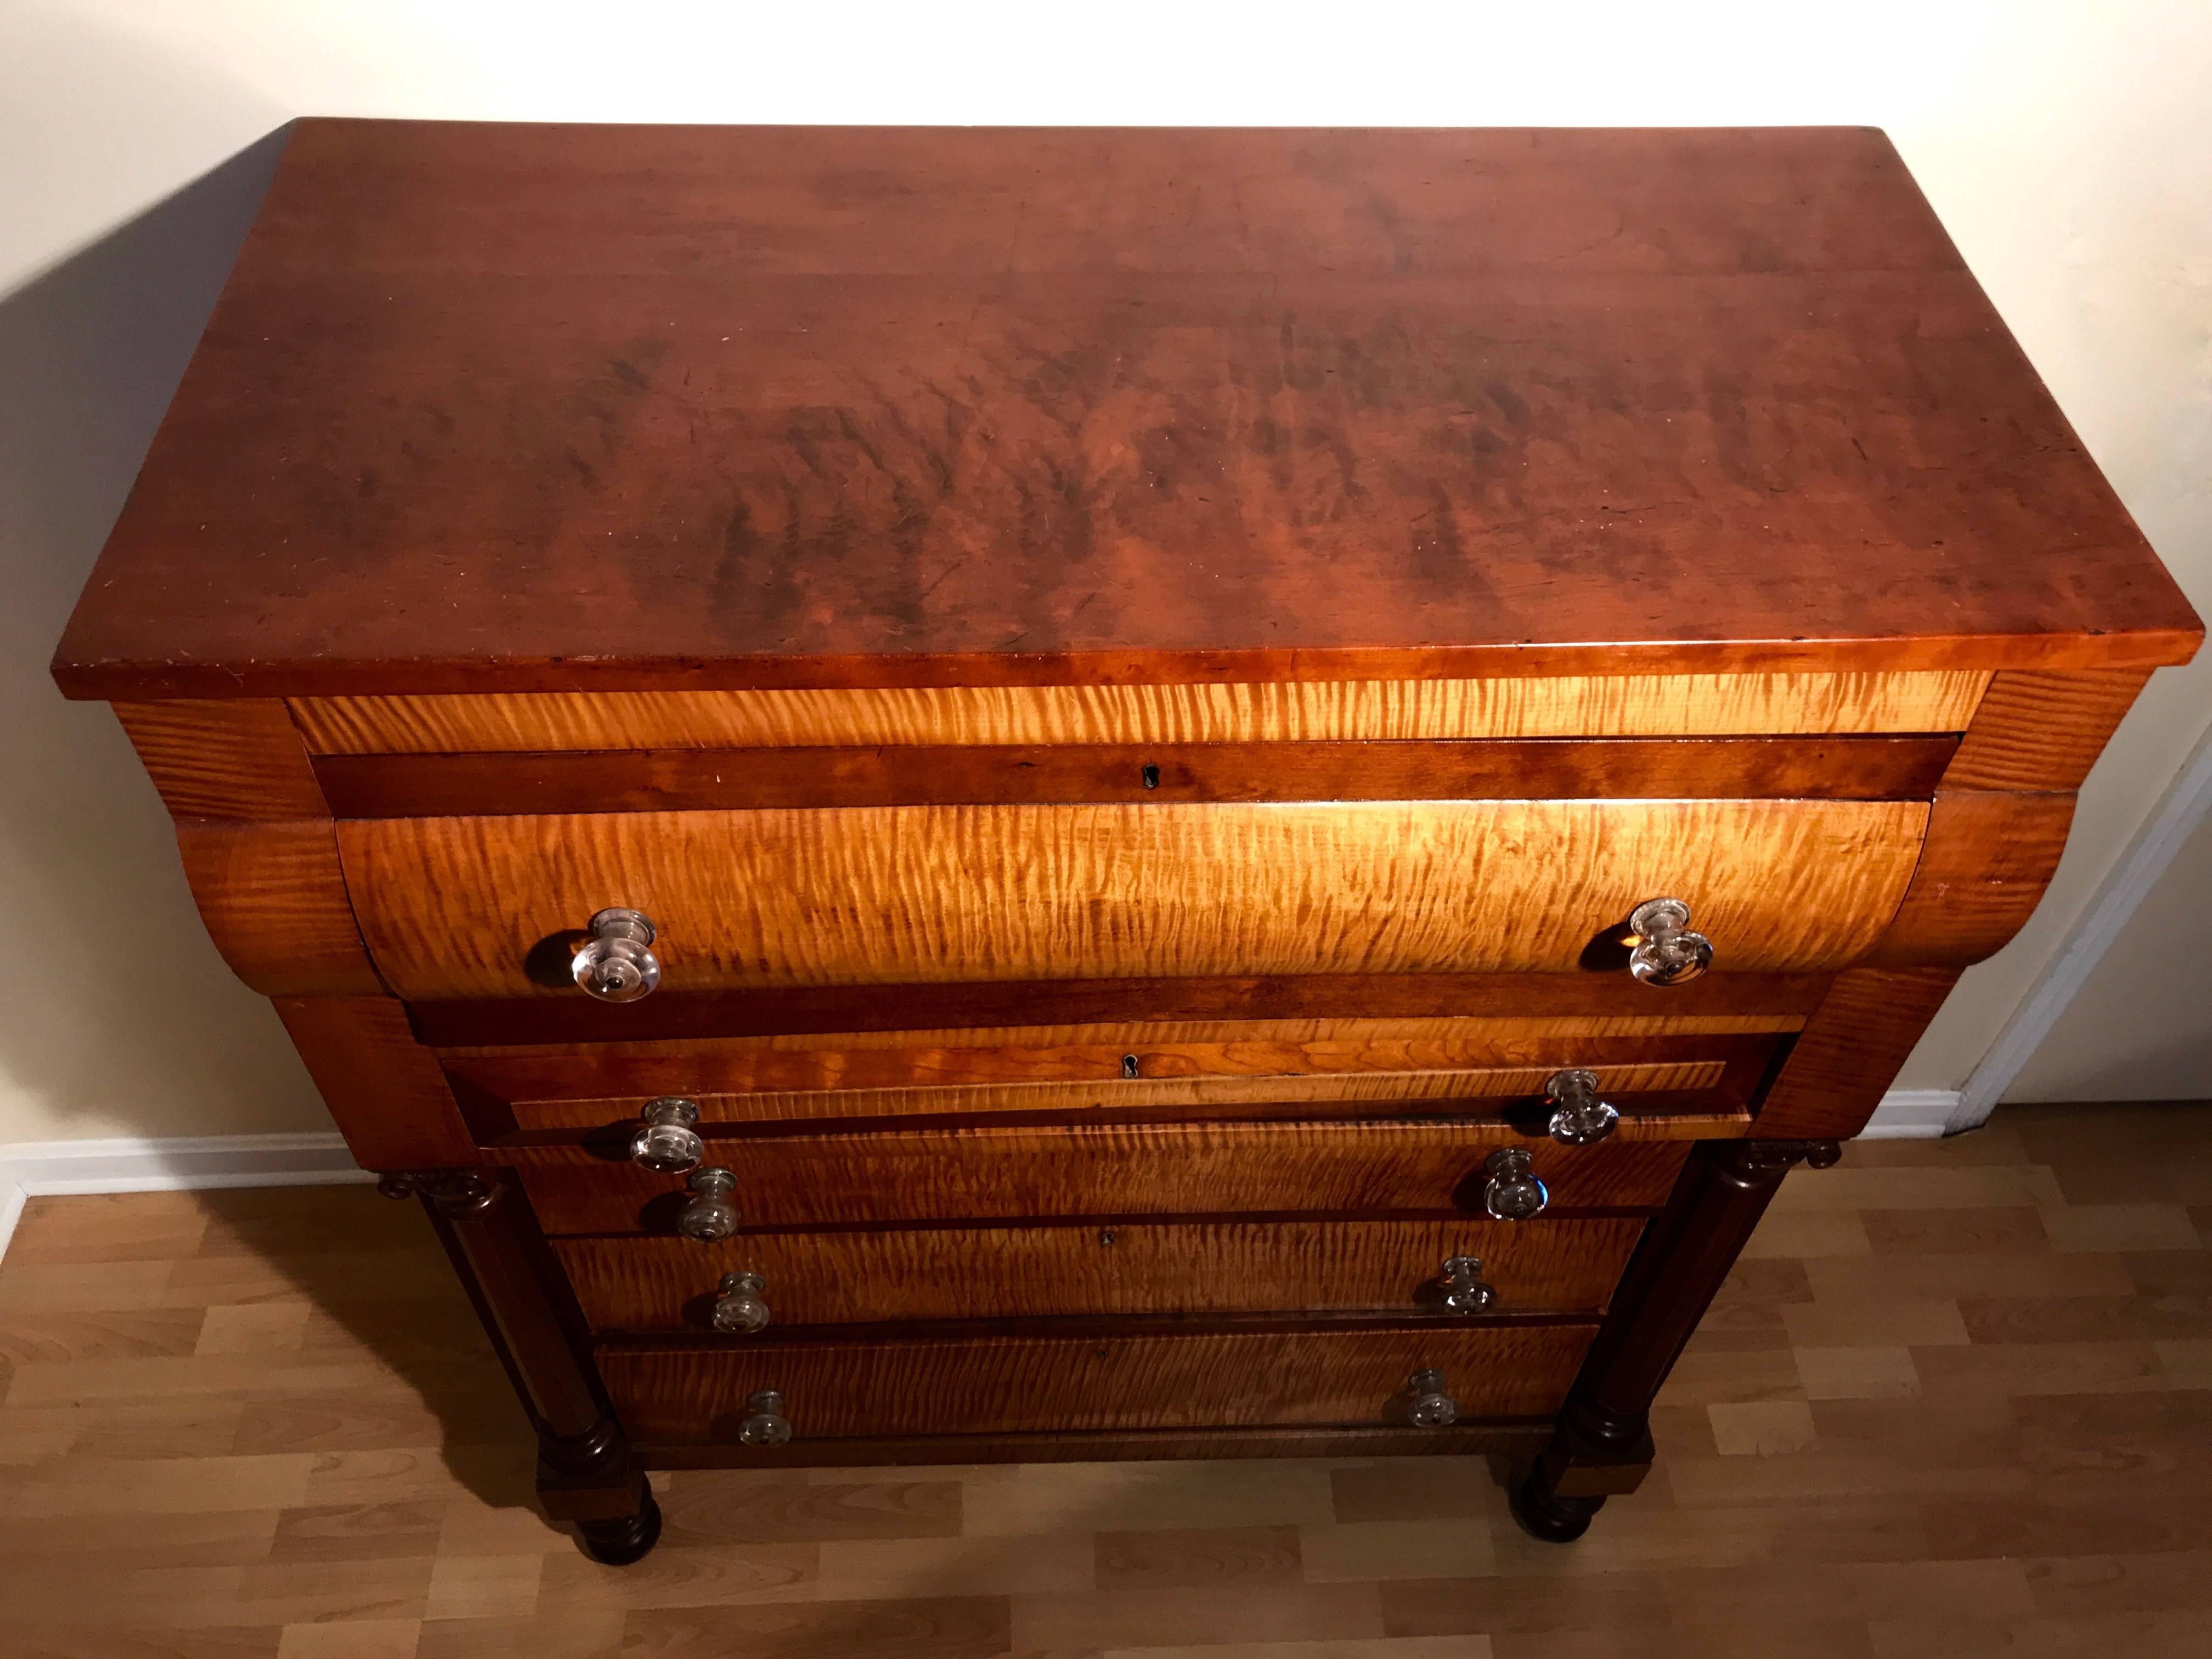 Mid-19th Century American Empire Chest of Drawers in Tiger Maple and Cherry, circa 1840 For Sale